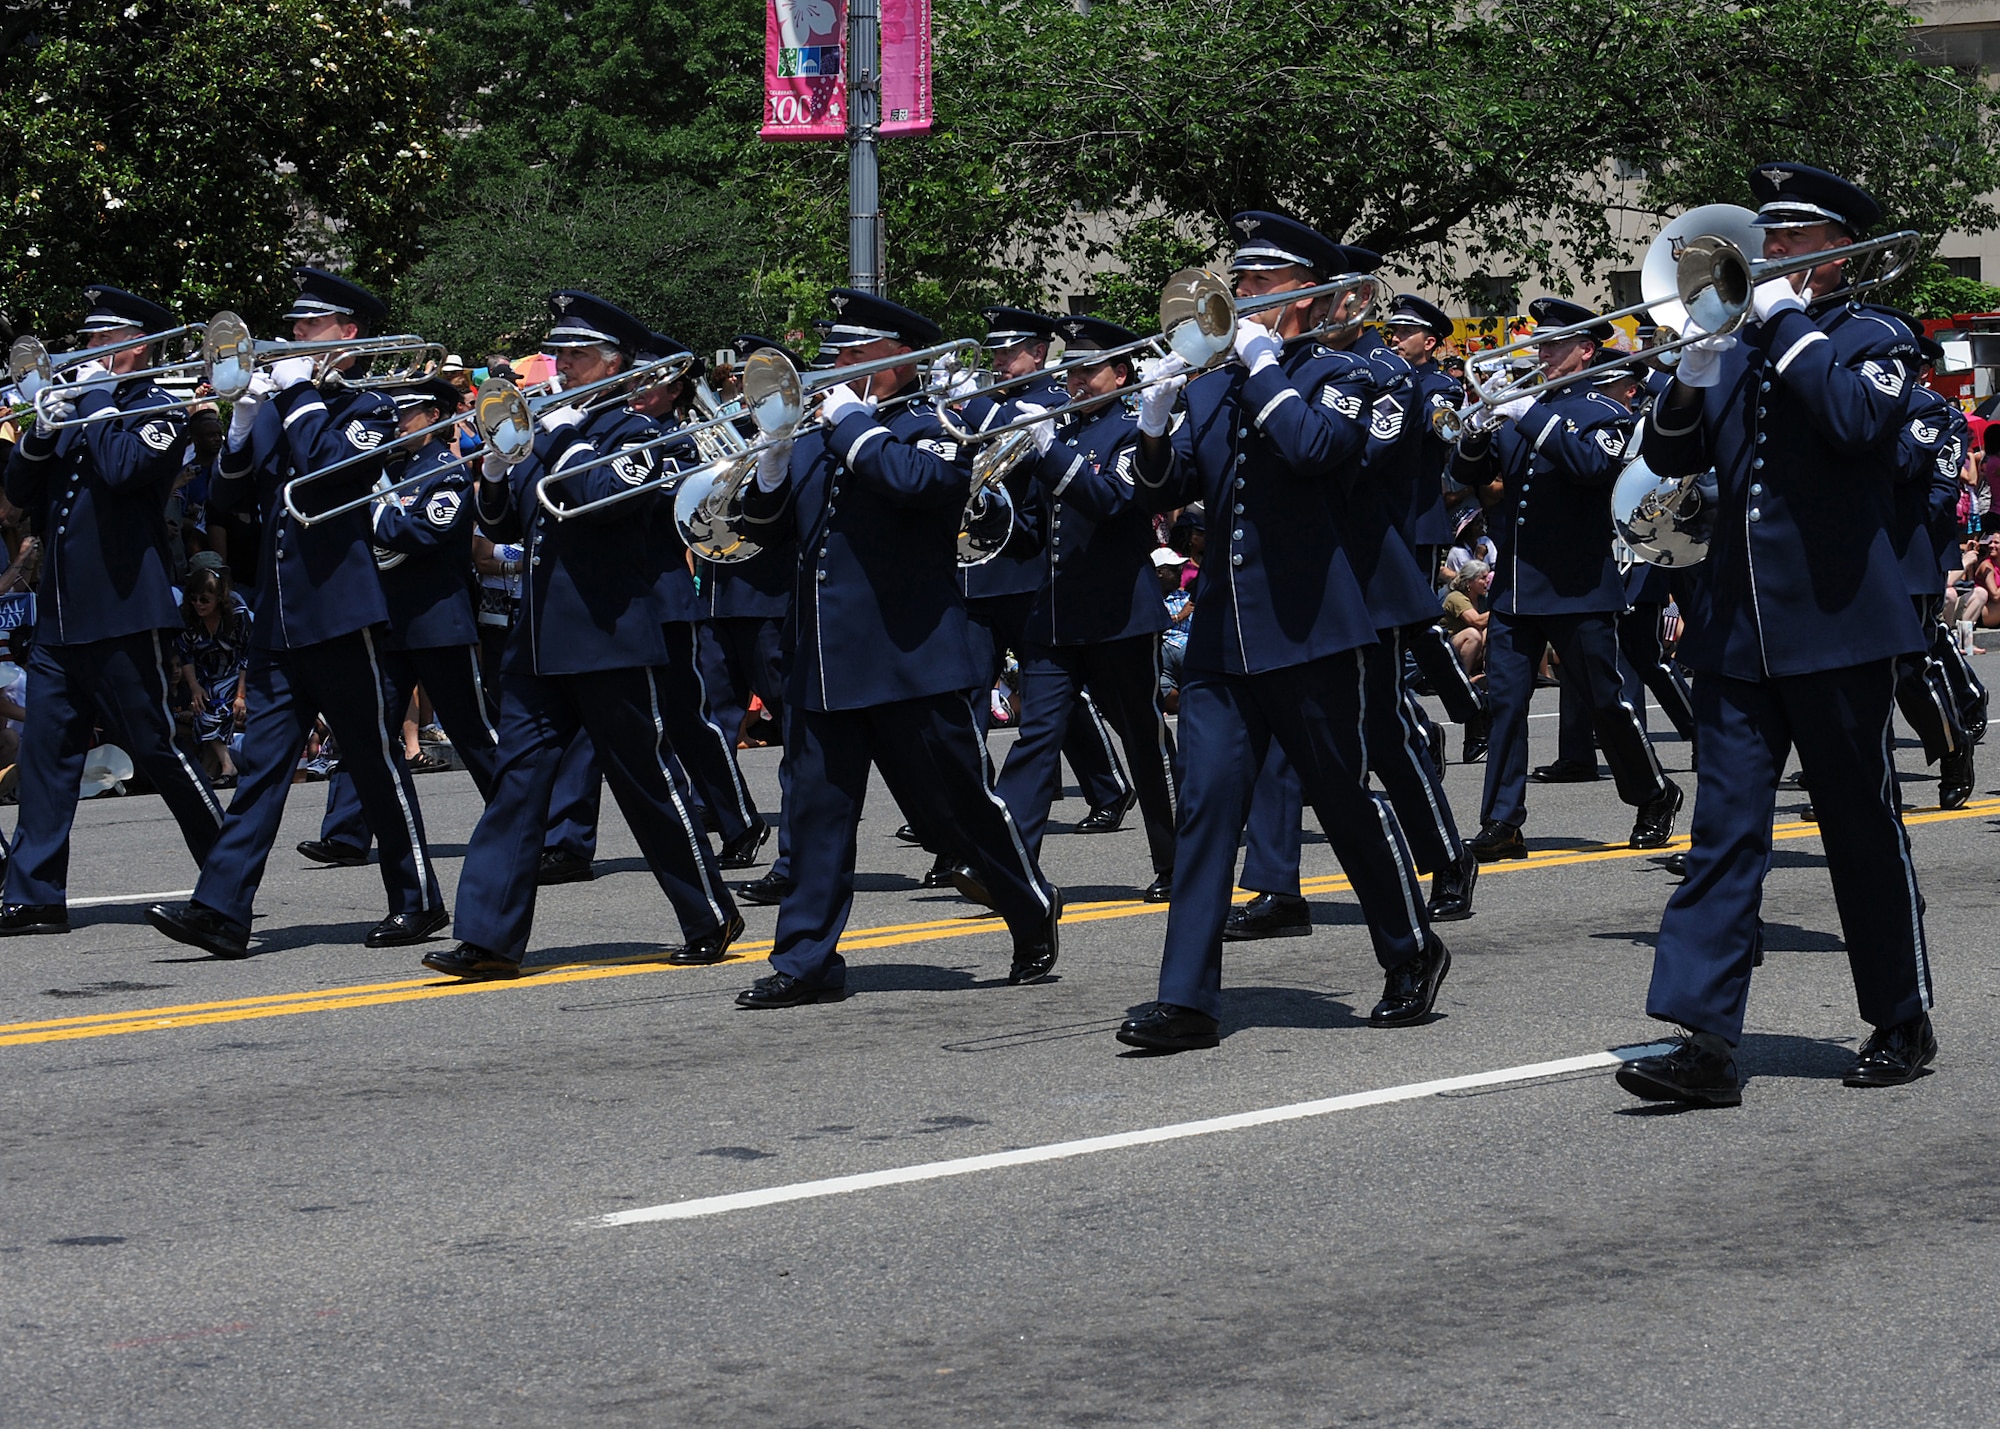 The United States Air Force Band performs during the National Memorial Day Parade, May 28, 2012 in Washington D.C. The annual National Memorial Day Parade is an opportunity for thousands of patriotic Americans to come together and honor those who have sacrificed so much in service to our country.